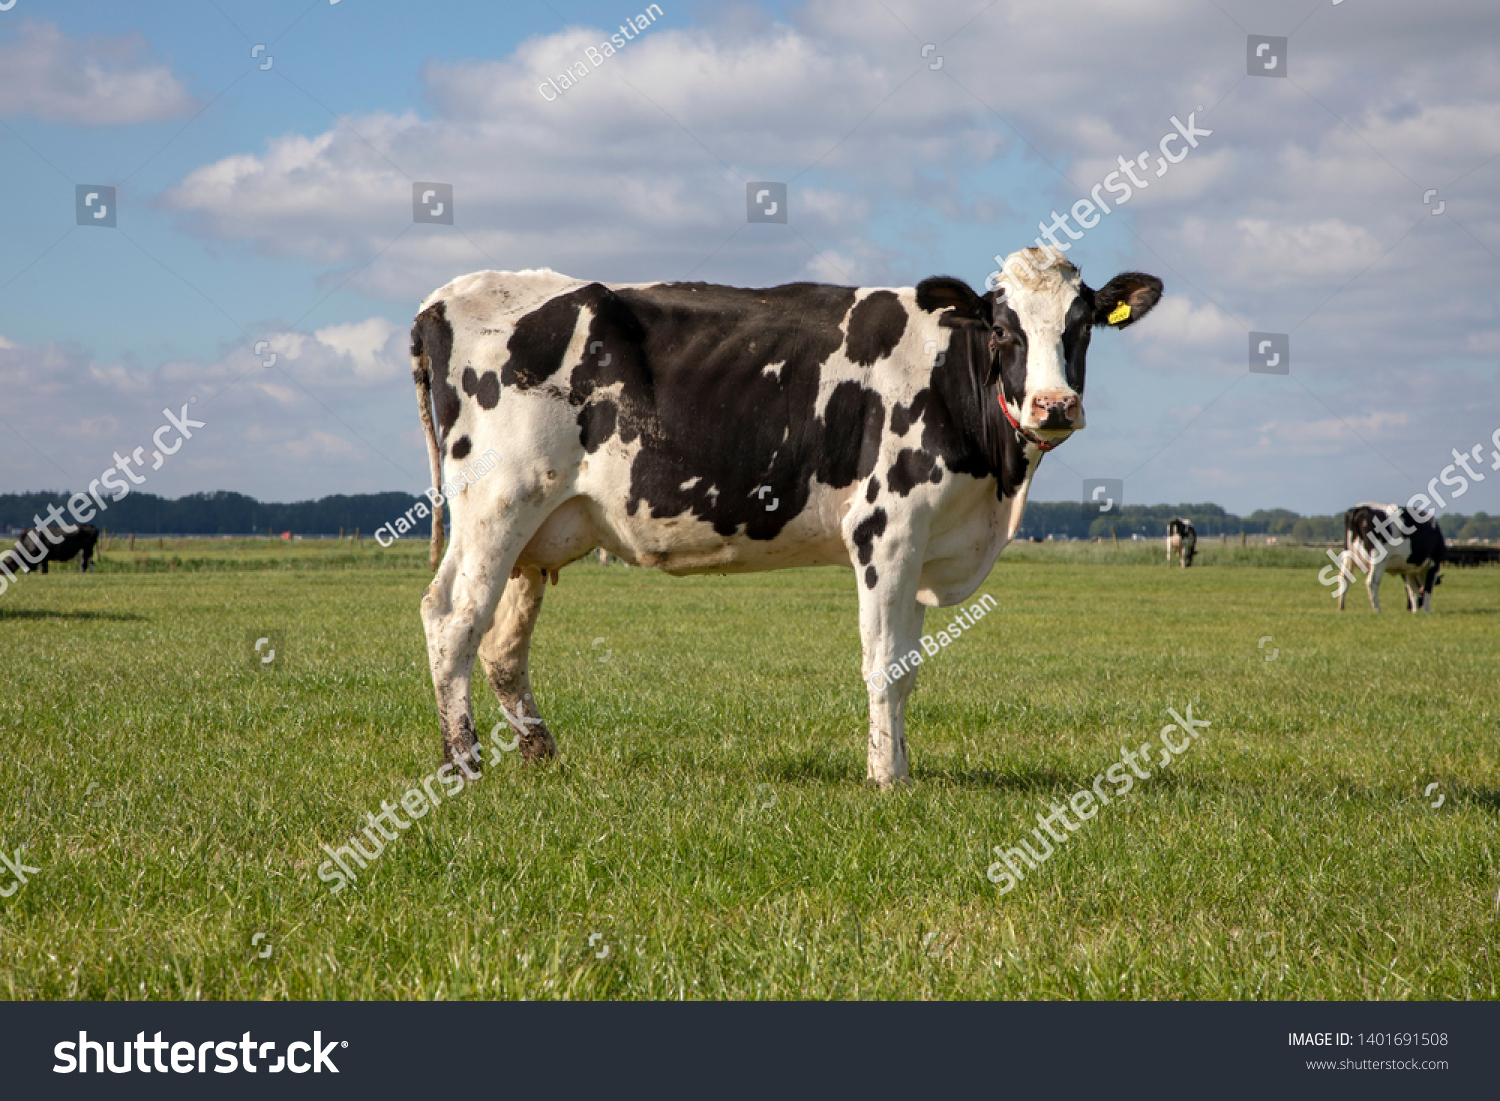 Black pied cow, friesian holstein, in the Netherlands, standing on green grass in a meadow, pasture, at the background a few cows, yellow ear tags and a blue sky. #1401691508